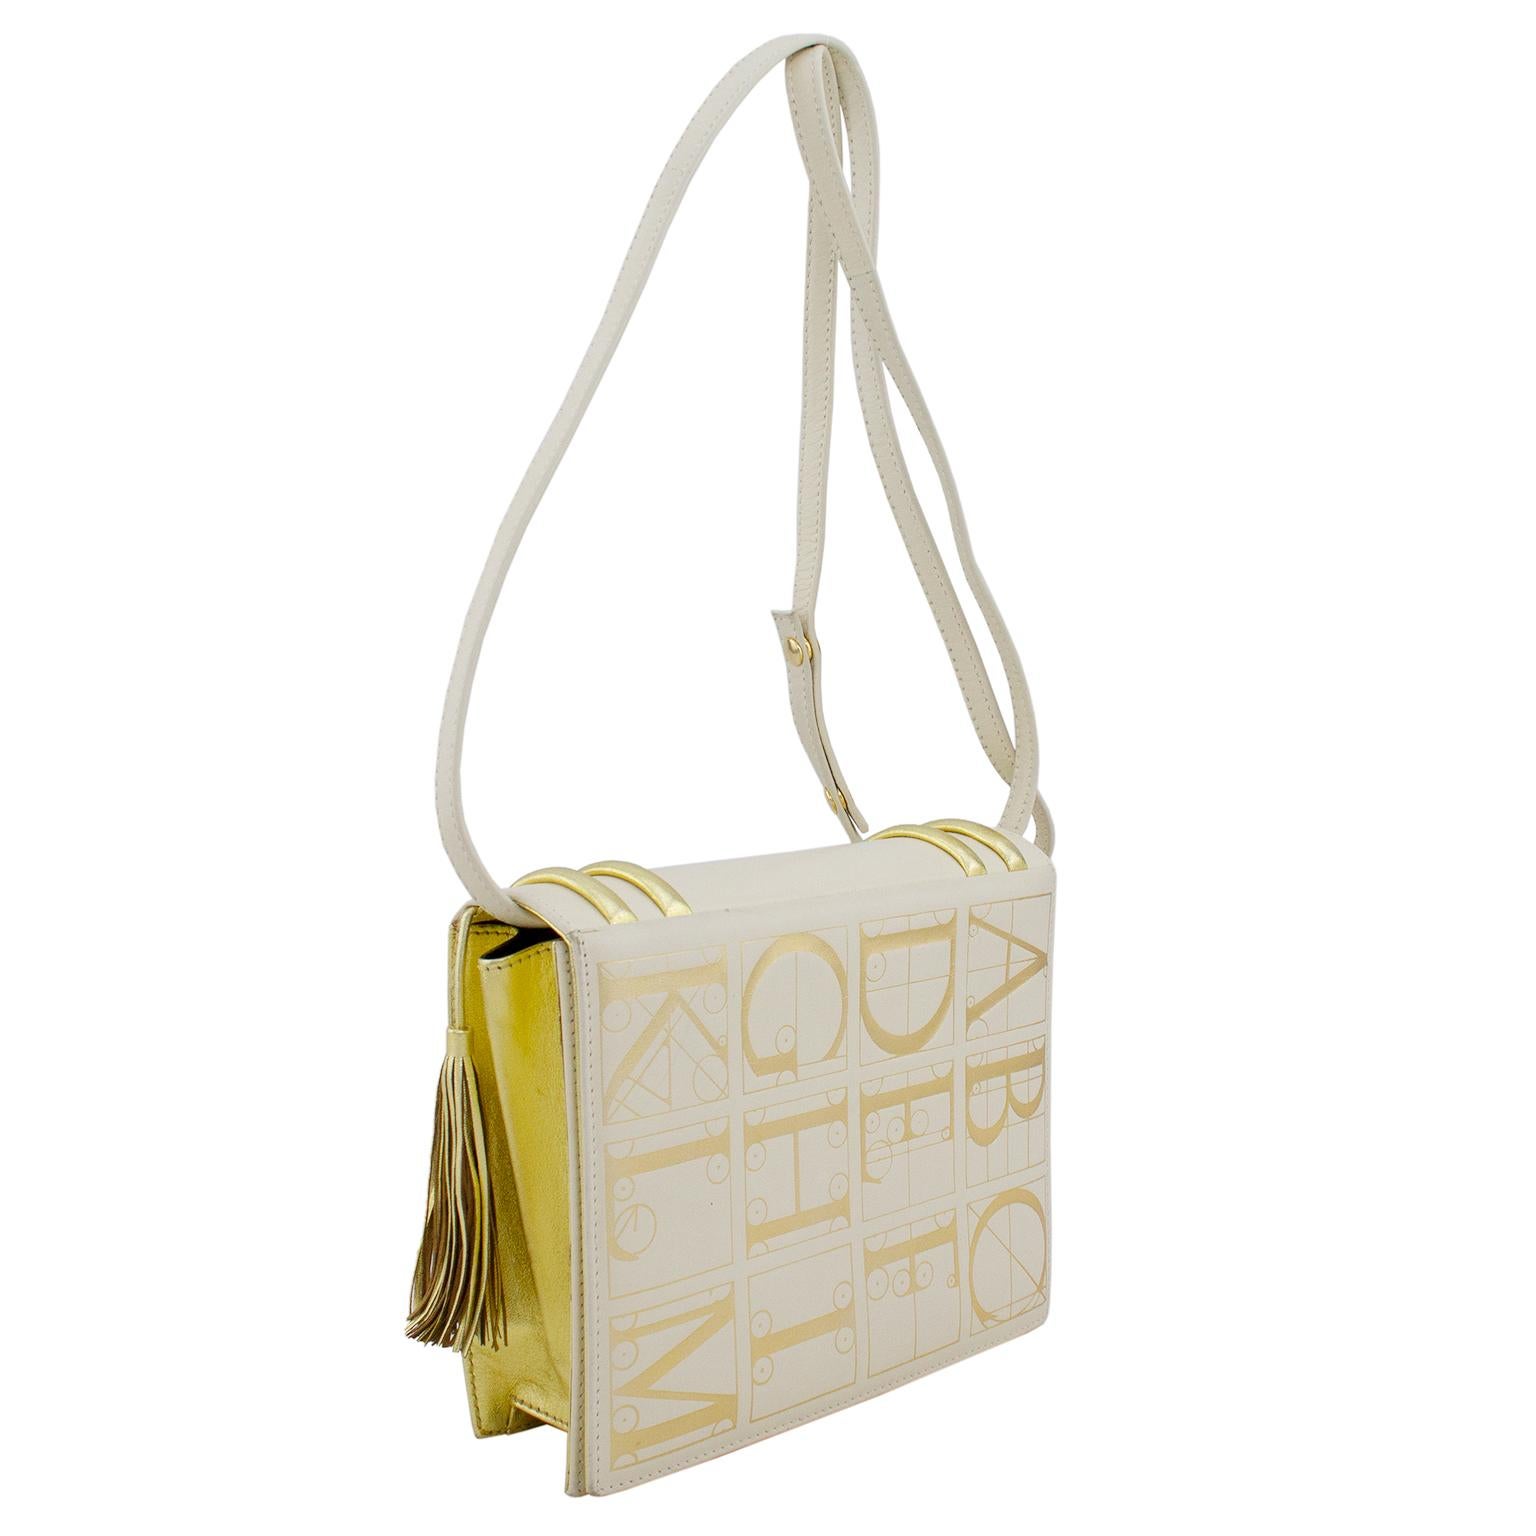 1980s Paloma Picasso cream leather evening purse with gold details and tassel. Front and back features the alphabet in large gold letters and mirrors the cover design of a whimsical faux library book. The fantasy shape adds a touch of humor and